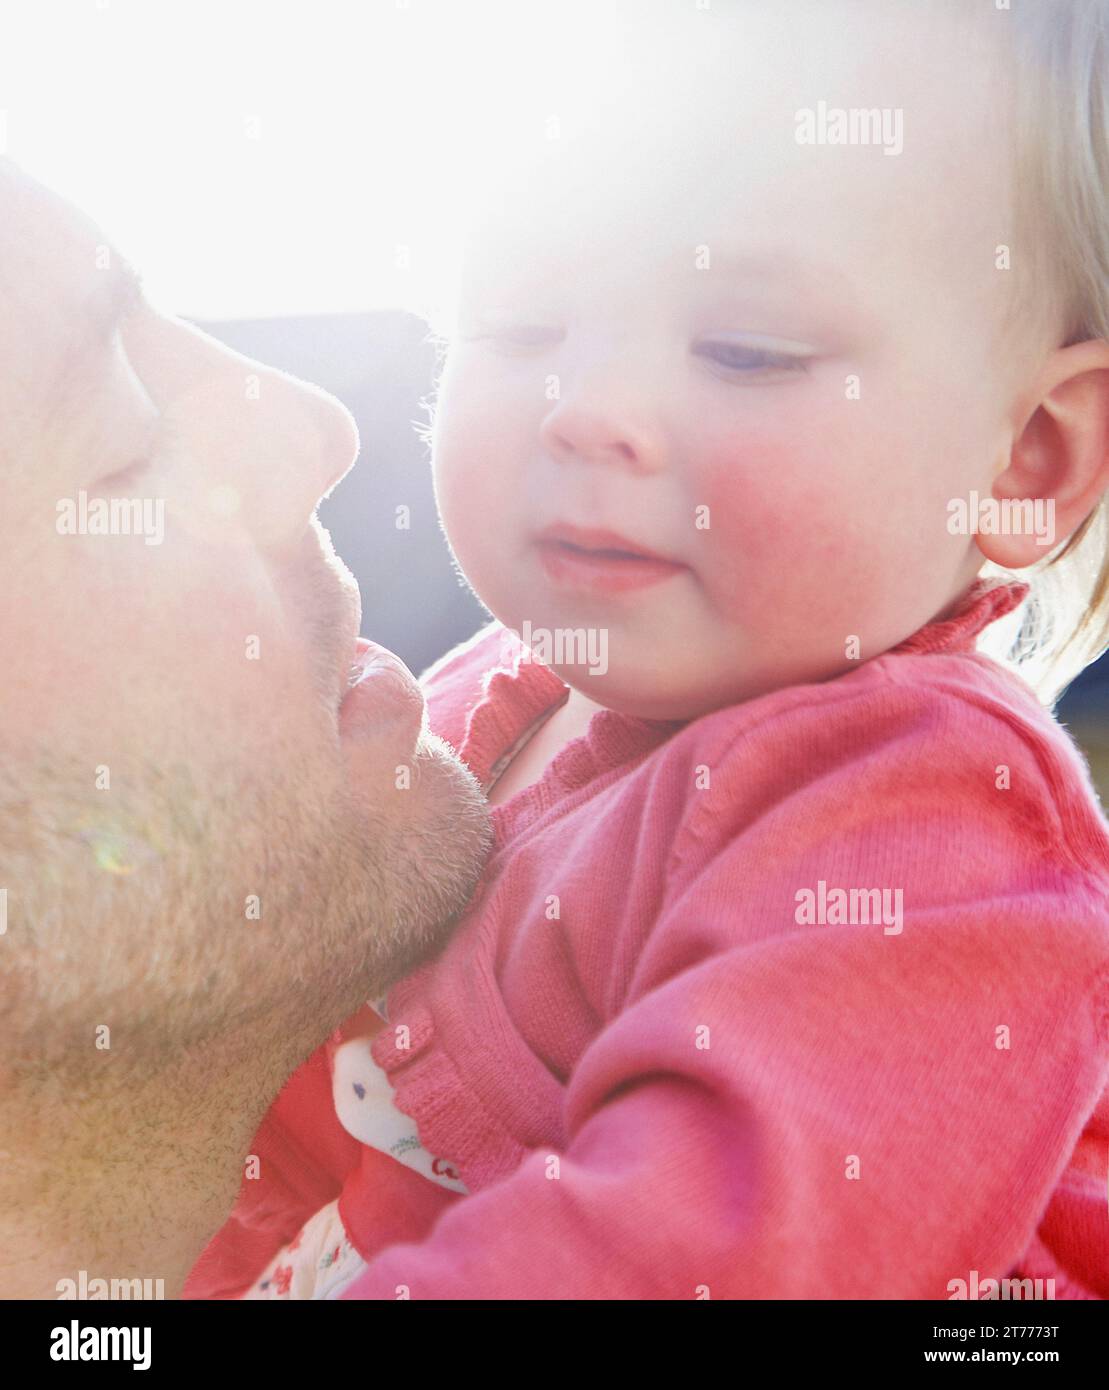 Father Holding Baby Girl, Close-up view Stock Photo